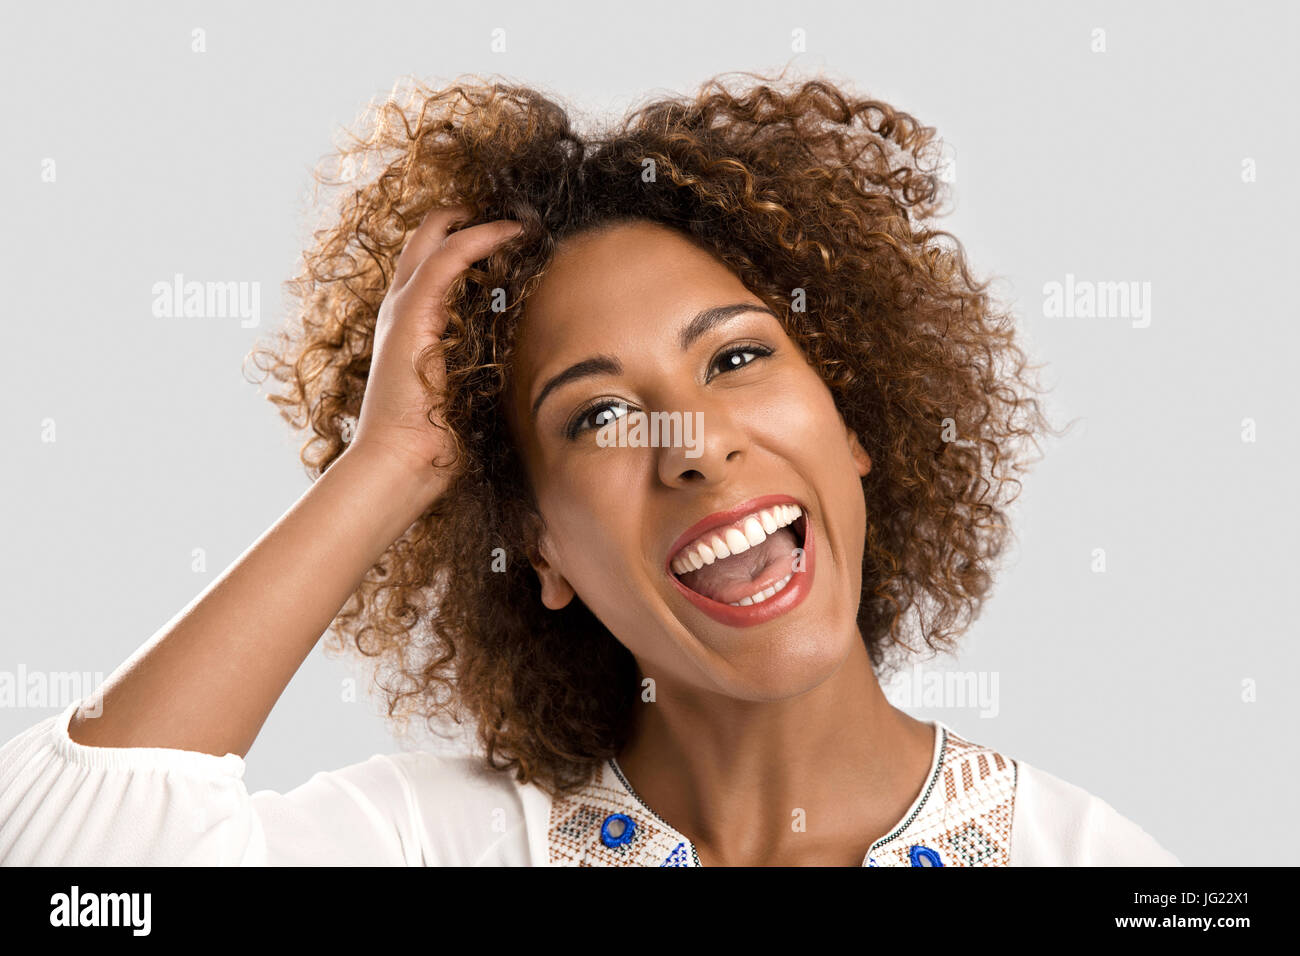 Portrait of a beautiful African American woman laughing Stock Photo